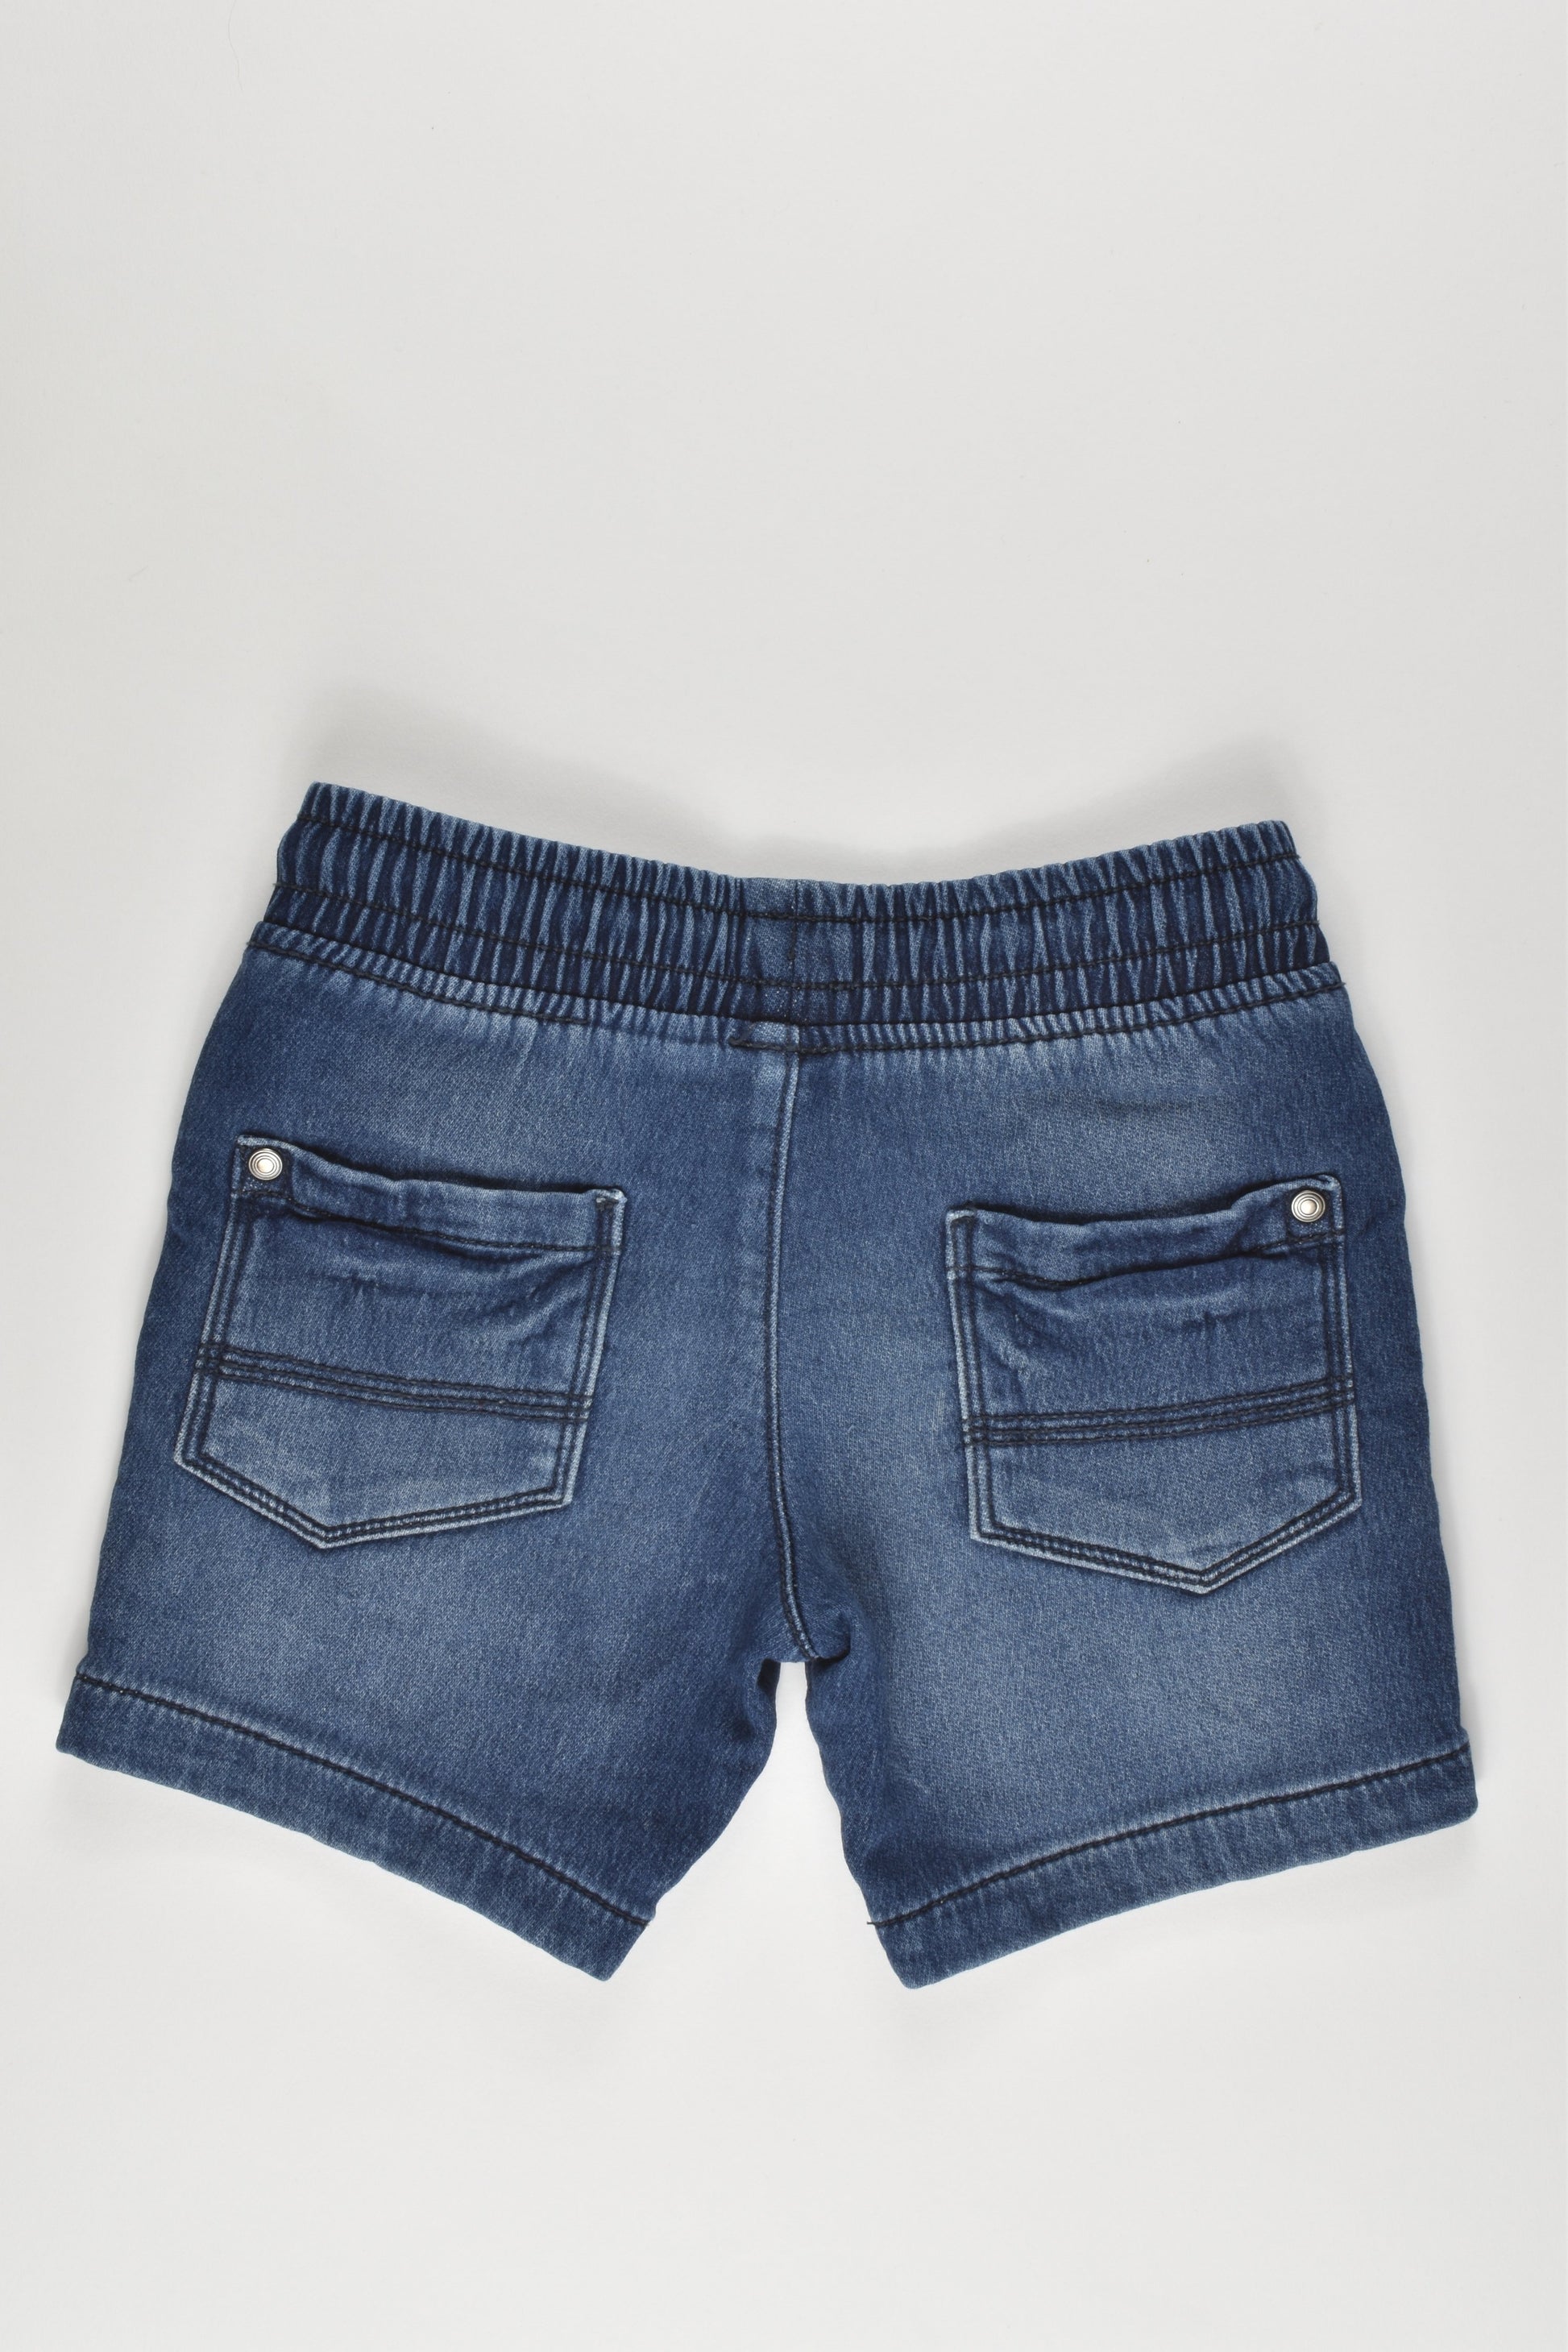 Target Size 3 Soft and Stretchy Denim Shorts